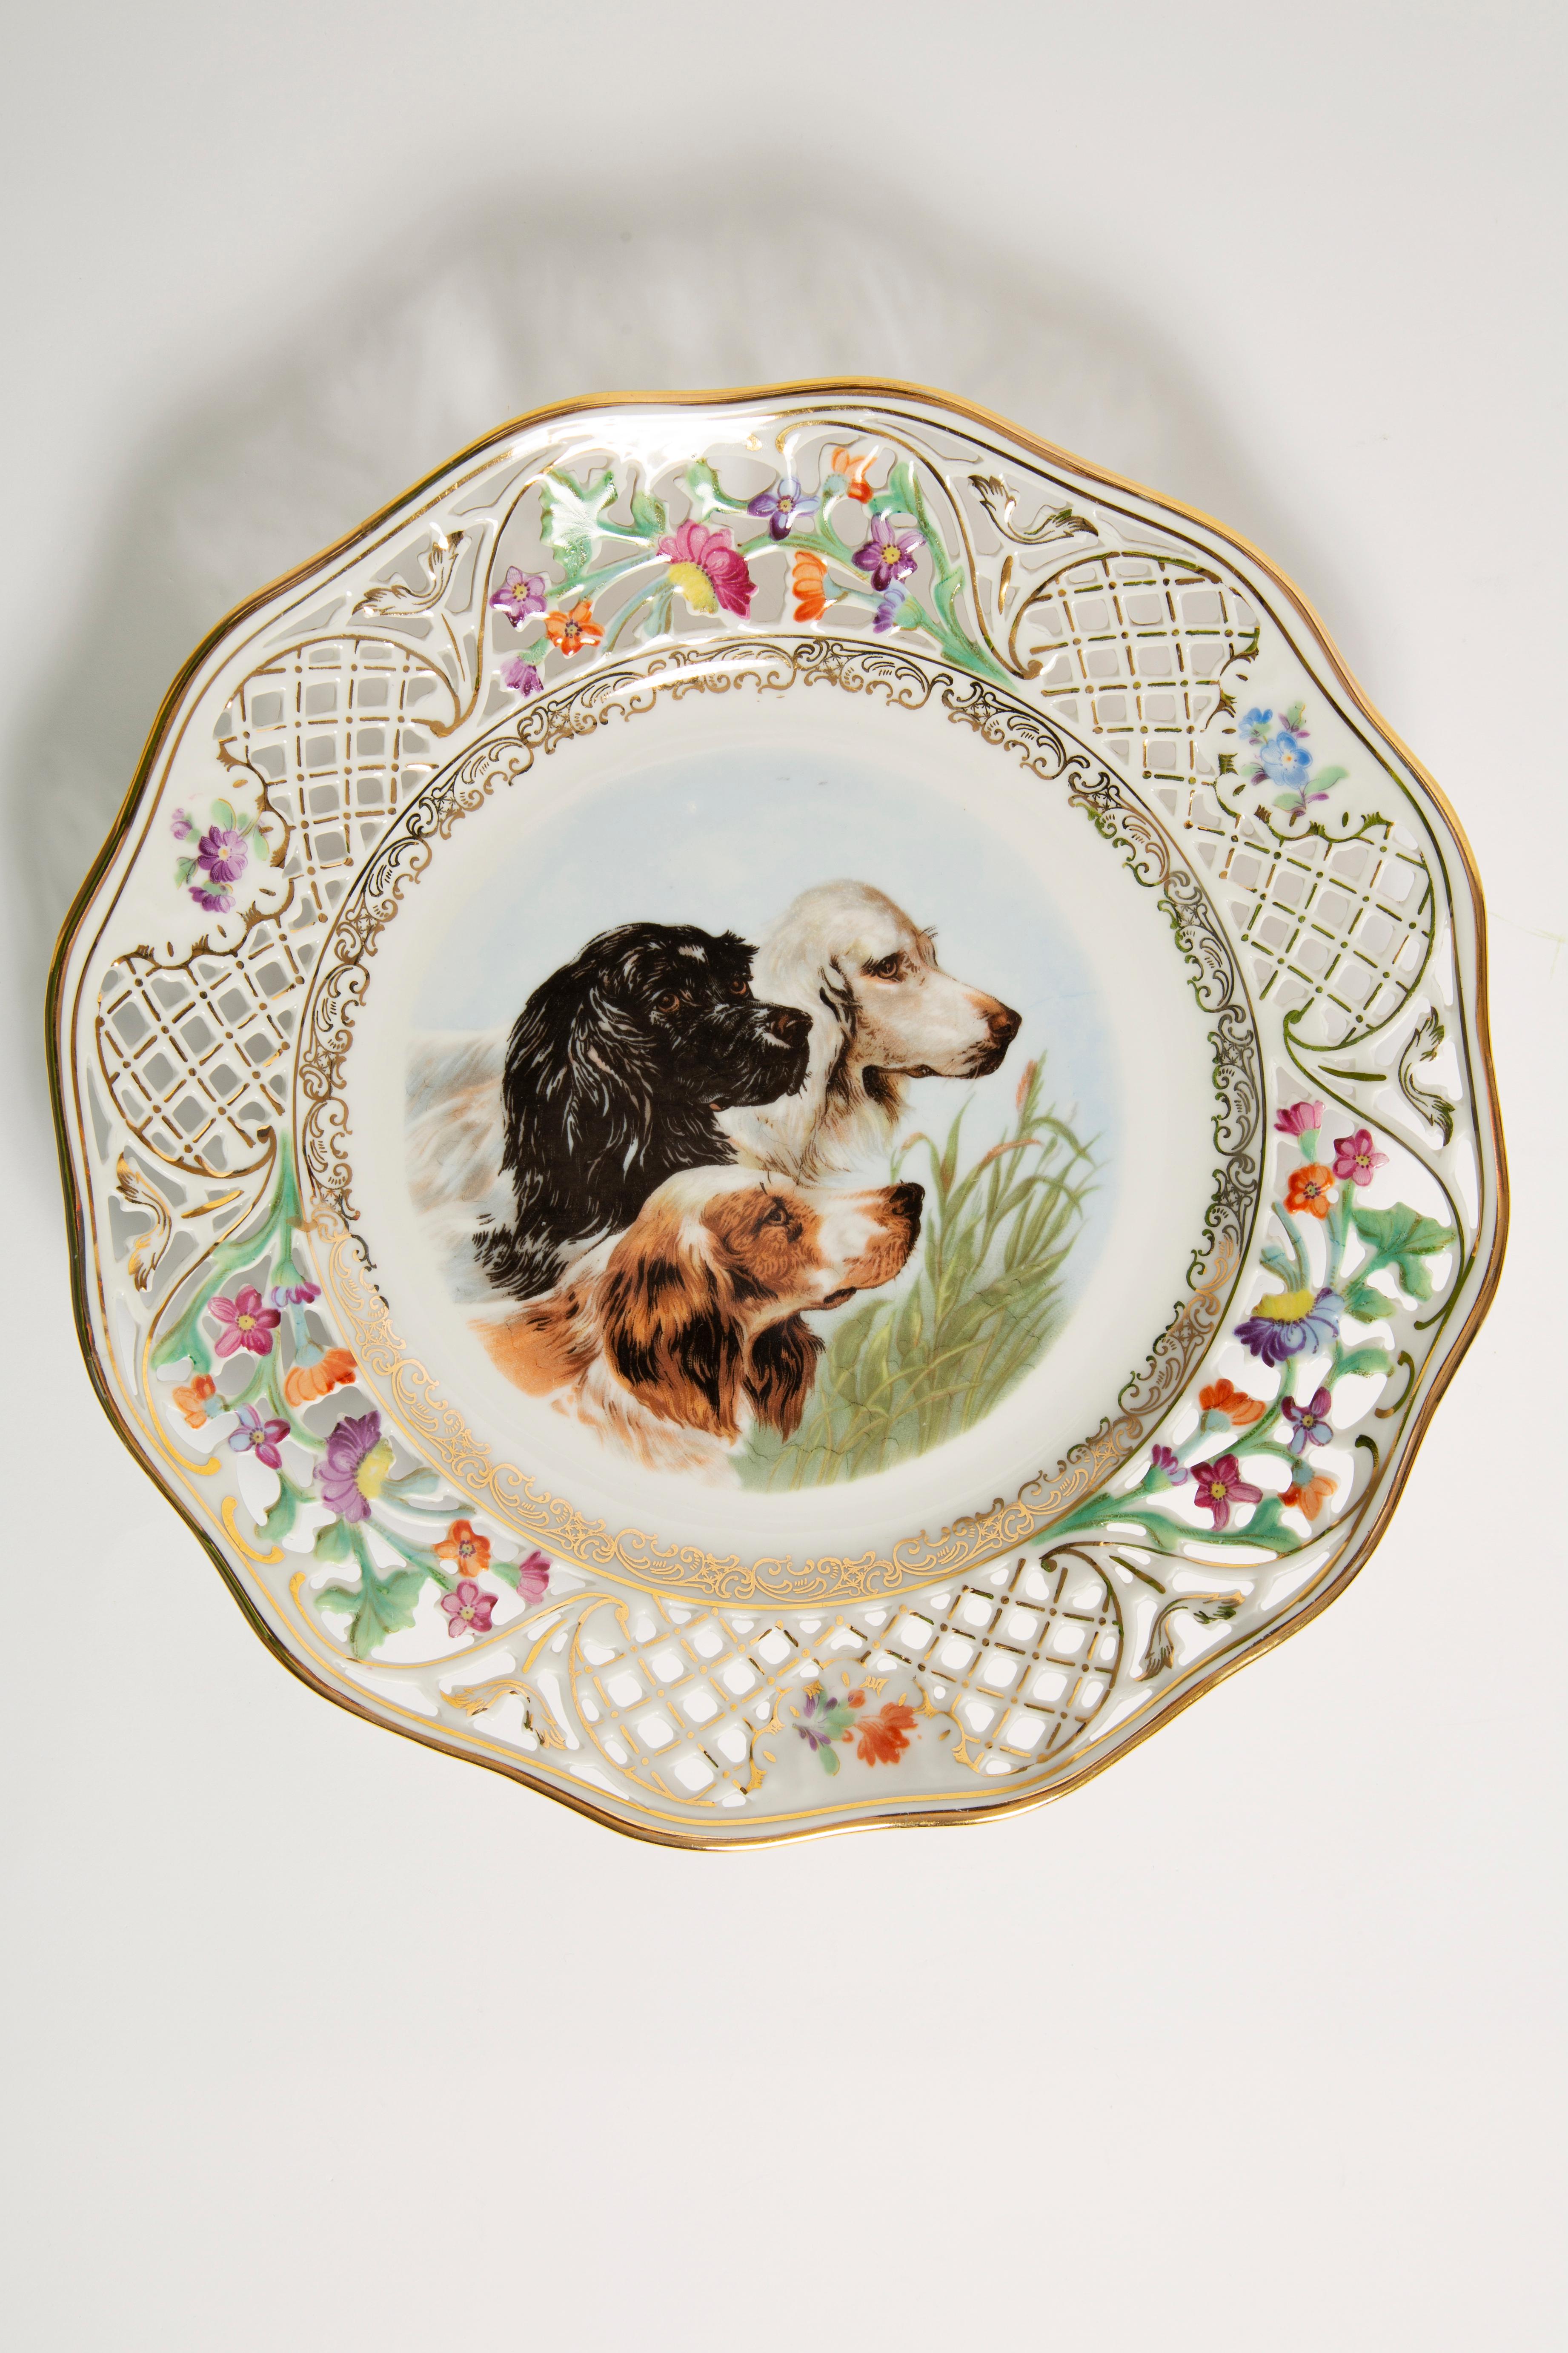 Mid-Century Modern Vintage Spaniel Dog and Flowers Decorative Porcelain Plate, Germany, 1970s For Sale